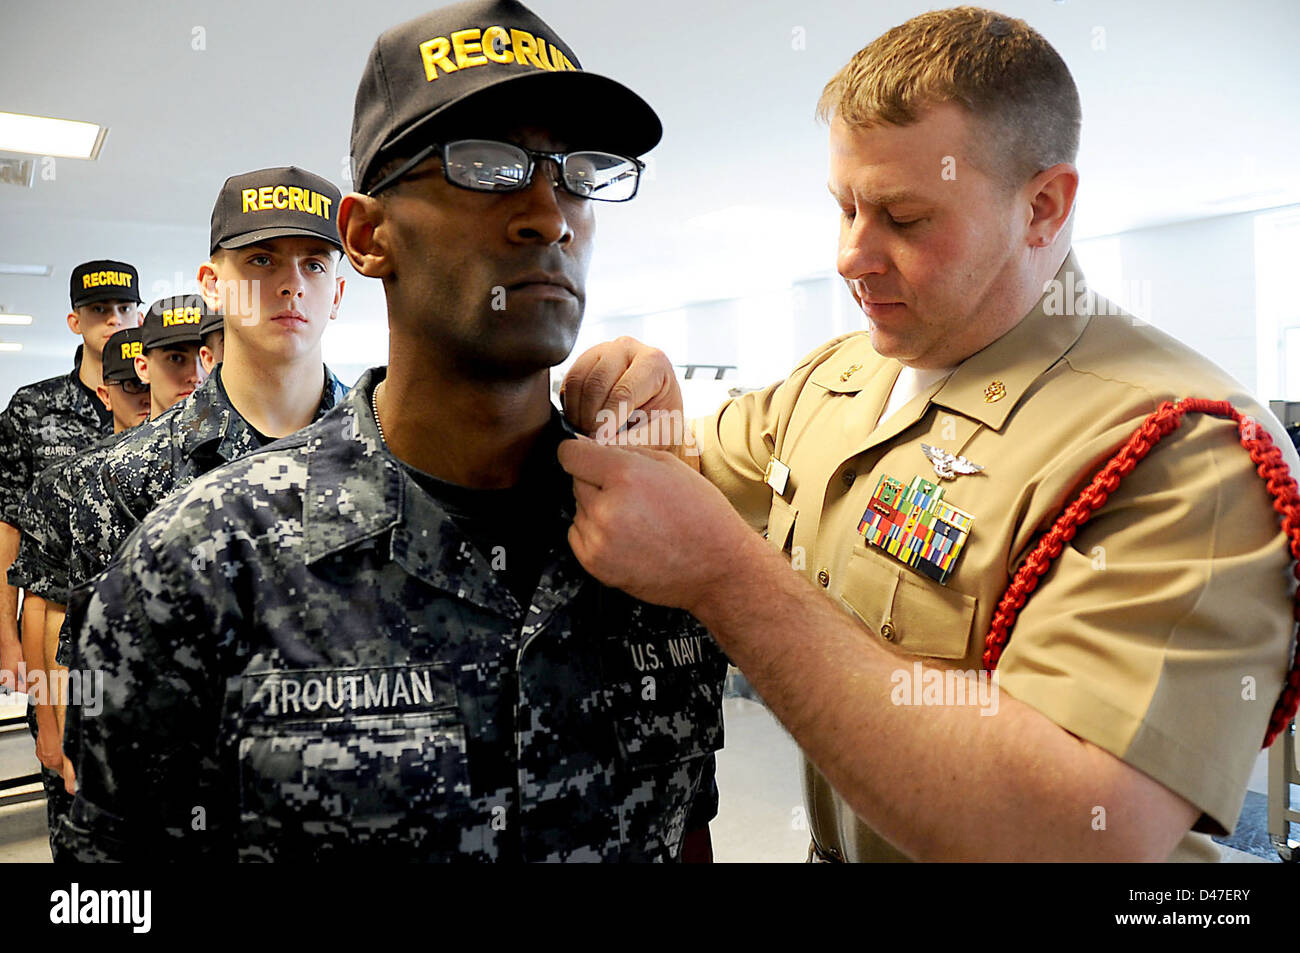 A recruit division commander inspects the uniform of a recruit at Recruit Training Command. Stock Photo